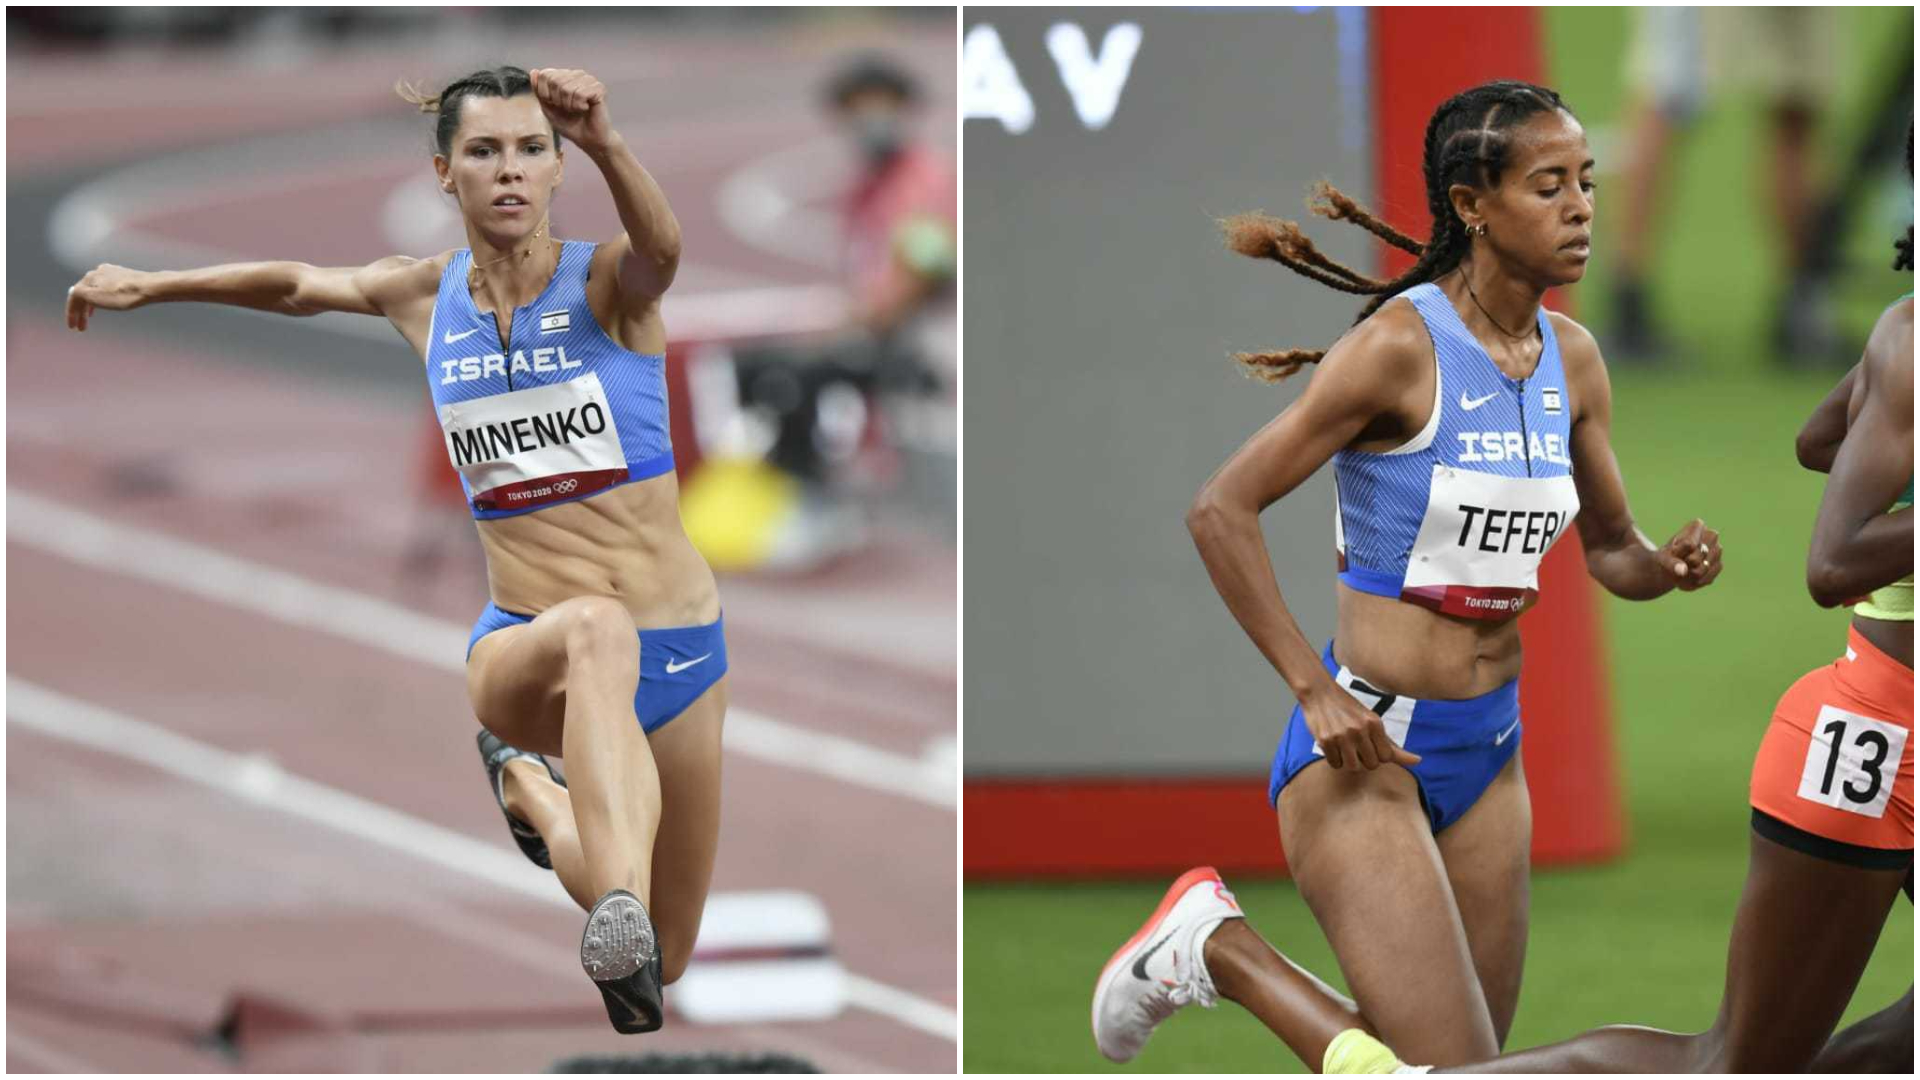 2 Israeli Athletes Advance To Final Rounds In Tokyo Olympics The Times Of Israel